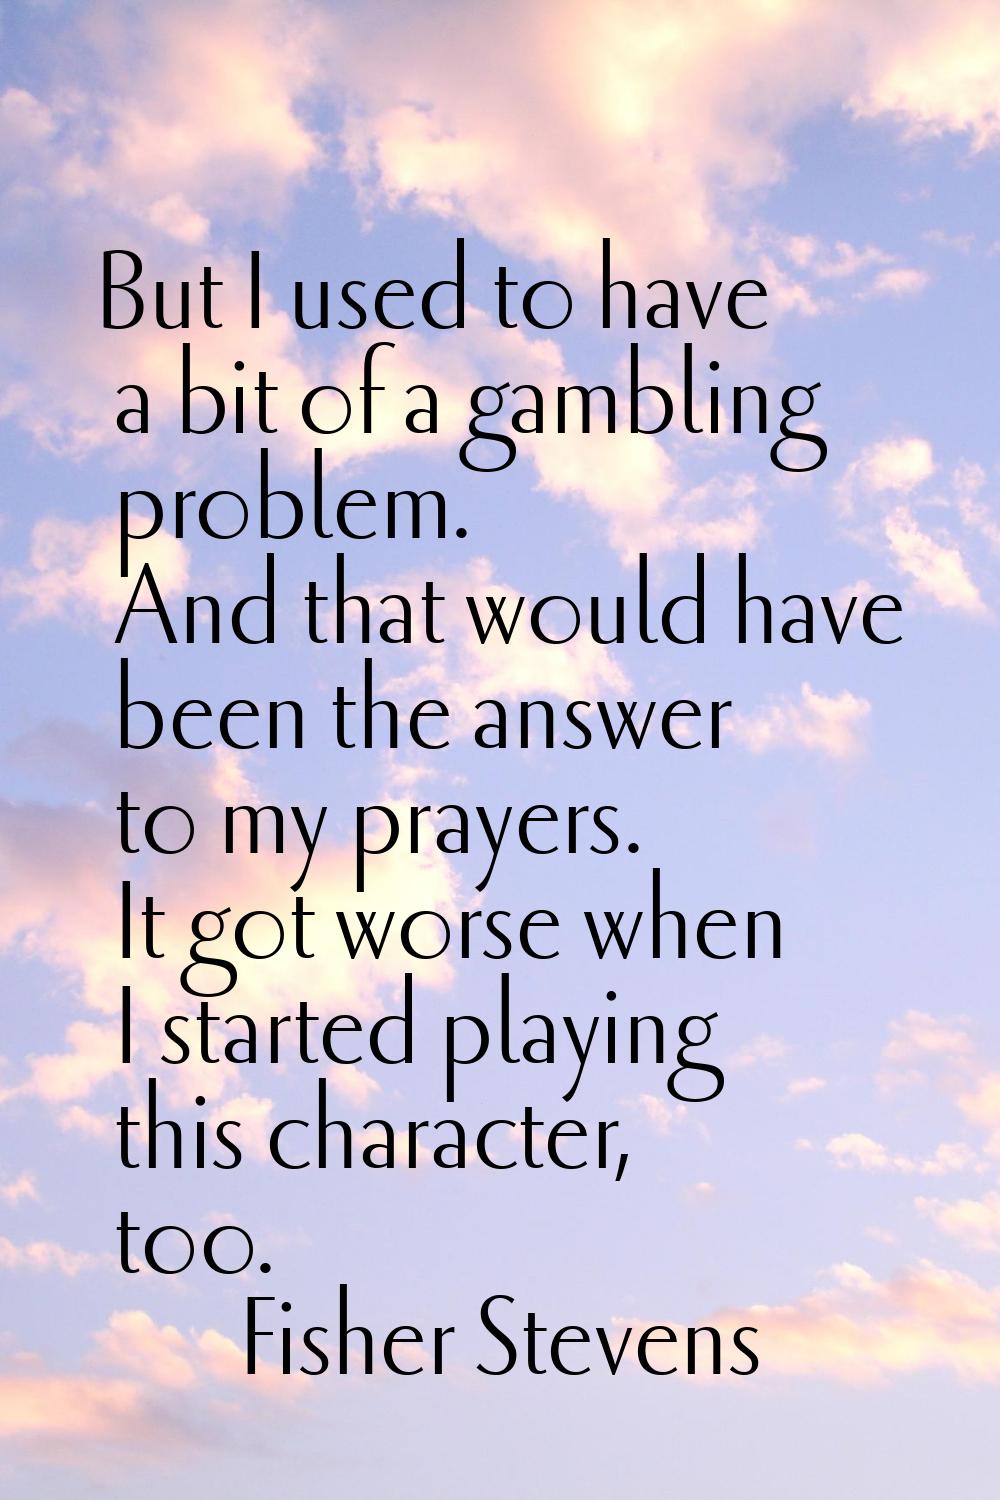 But I used to have a bit of a gambling problem. And that would have been the answer to my prayers. 